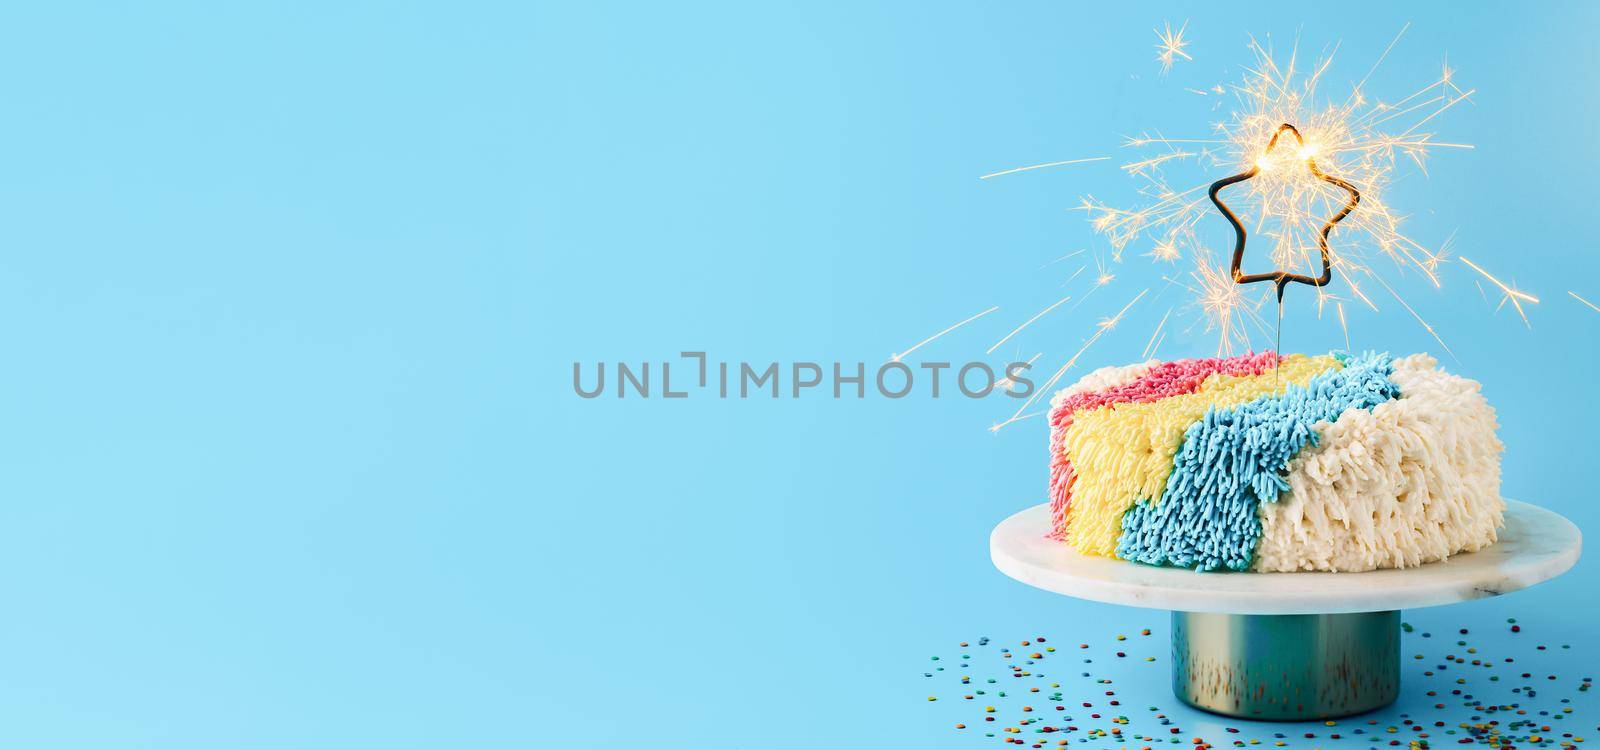 Shag cake with burned sparkler star on blue background. Colorful shag cake with perfect vanilla buttercream. Idea of visually striking cake decorating trendy cake, copy space. Long horizontal banner.